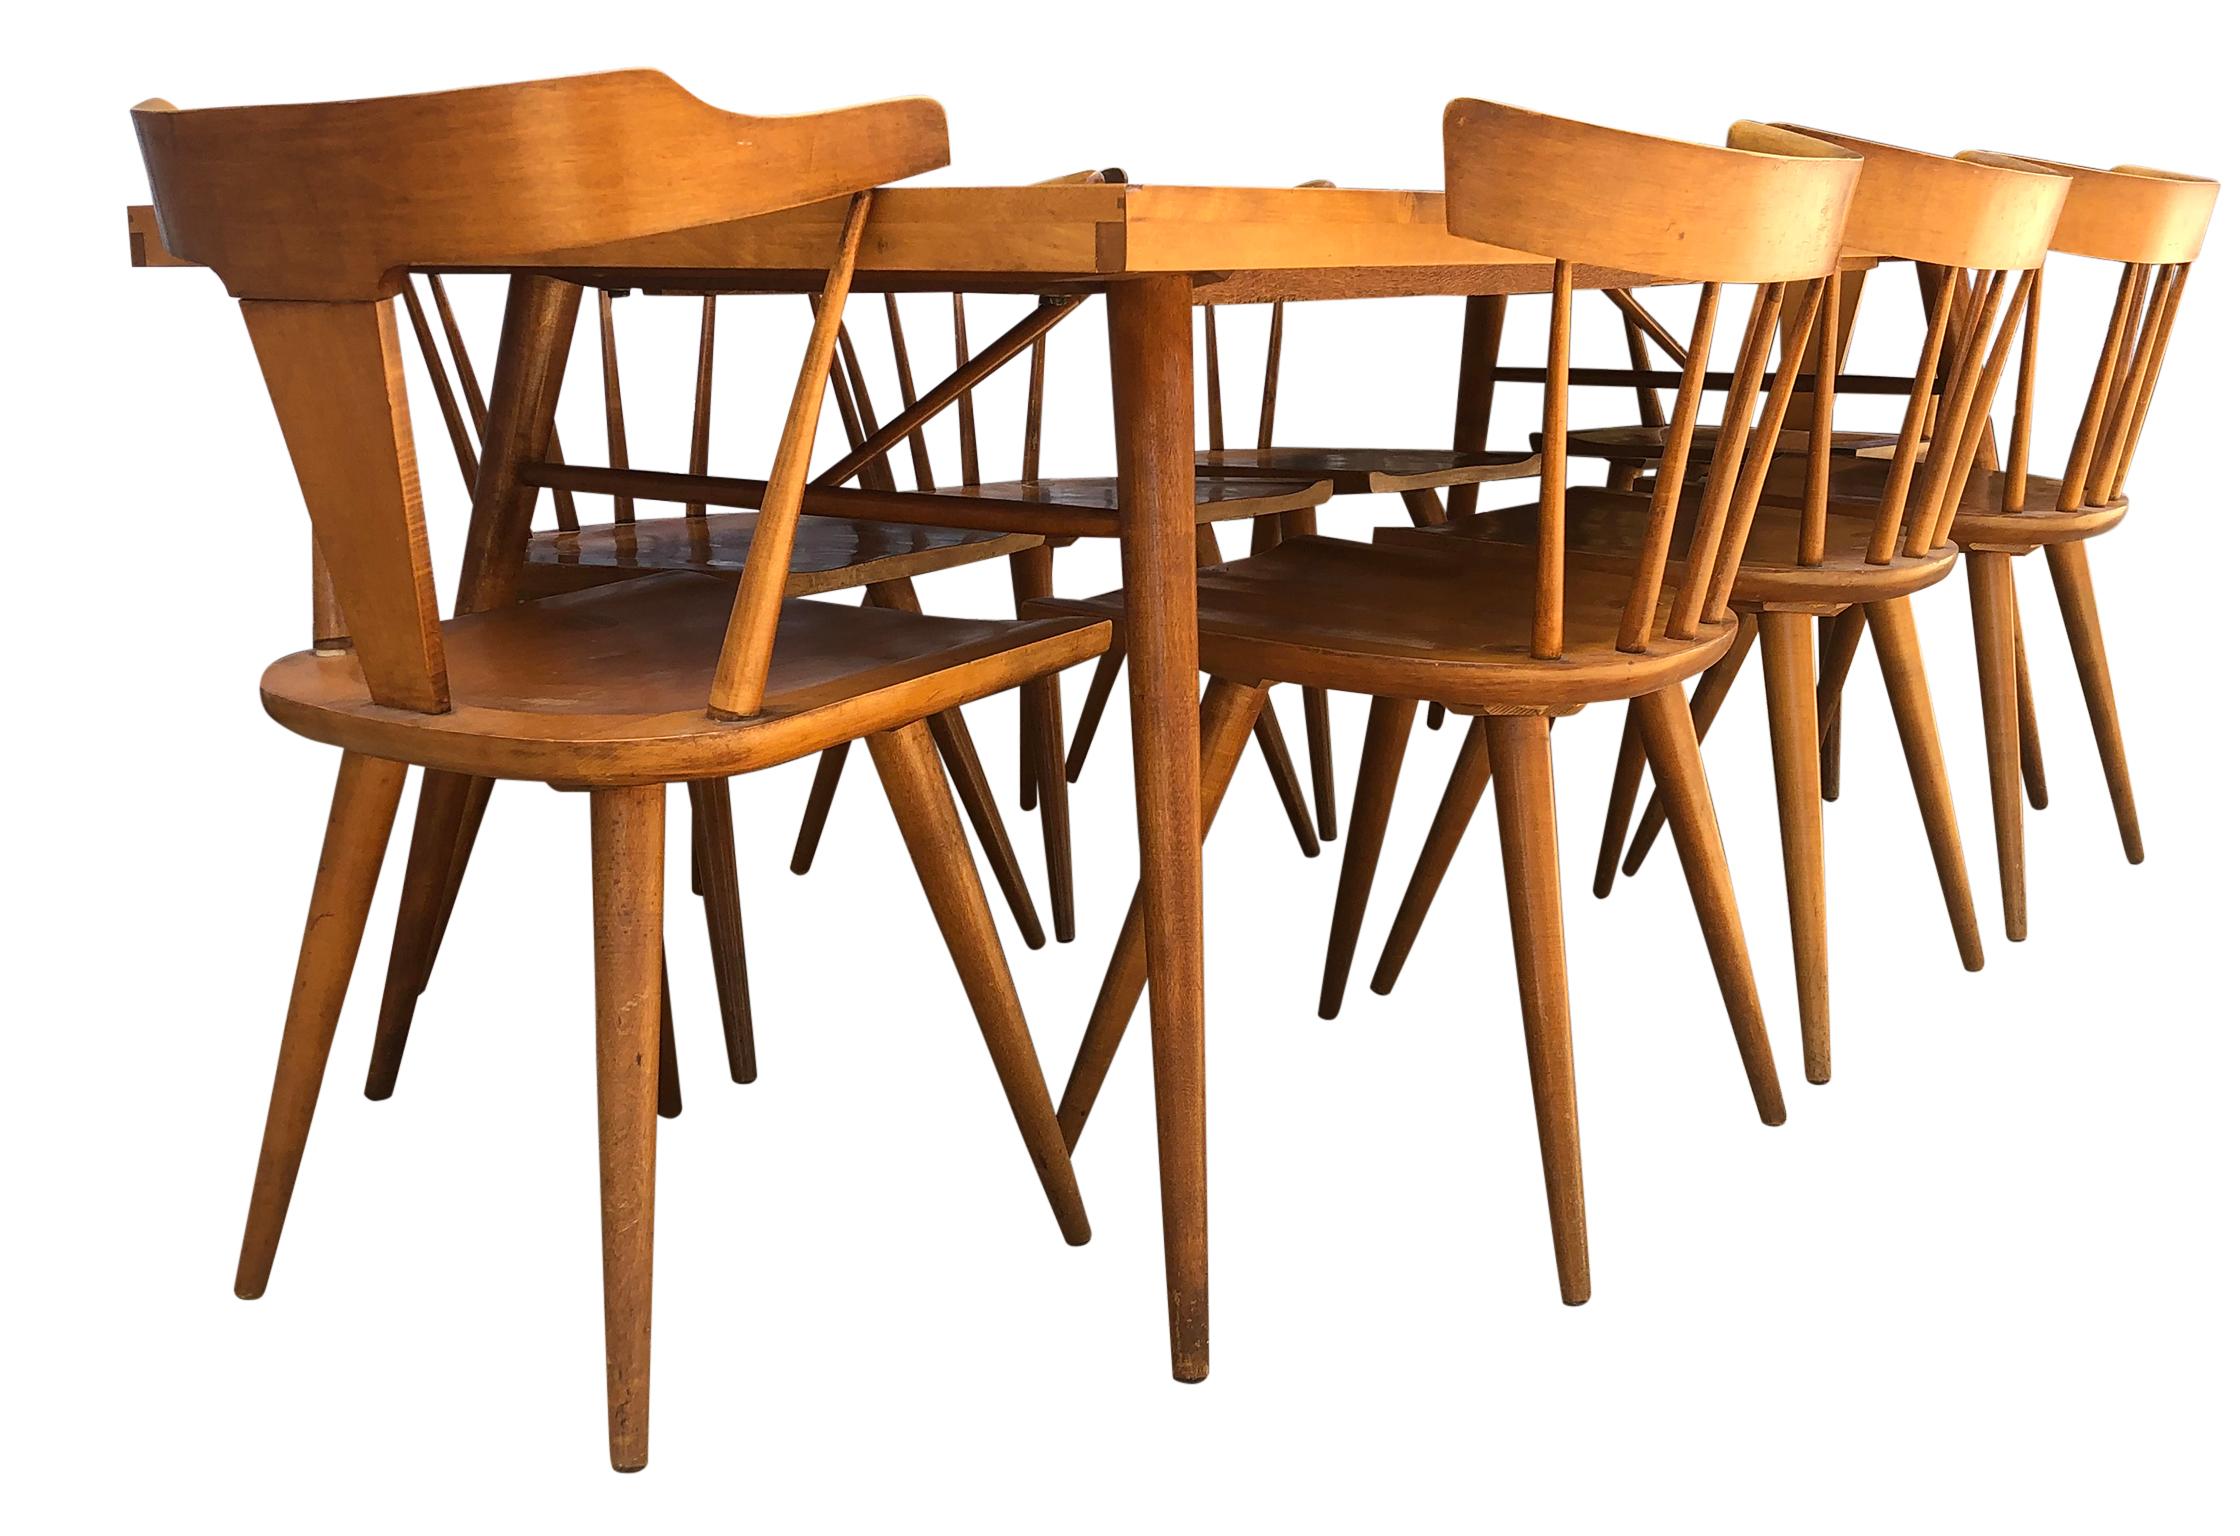 Beautiful early 1950s Paul McCobb maple dining table set with 8 maple chairs. Great midcentury design. Totally refinished dining table #1522 with 4 tapered legs with dowel supports. Solid maple everything. (6) original Spindle back side (2) T back